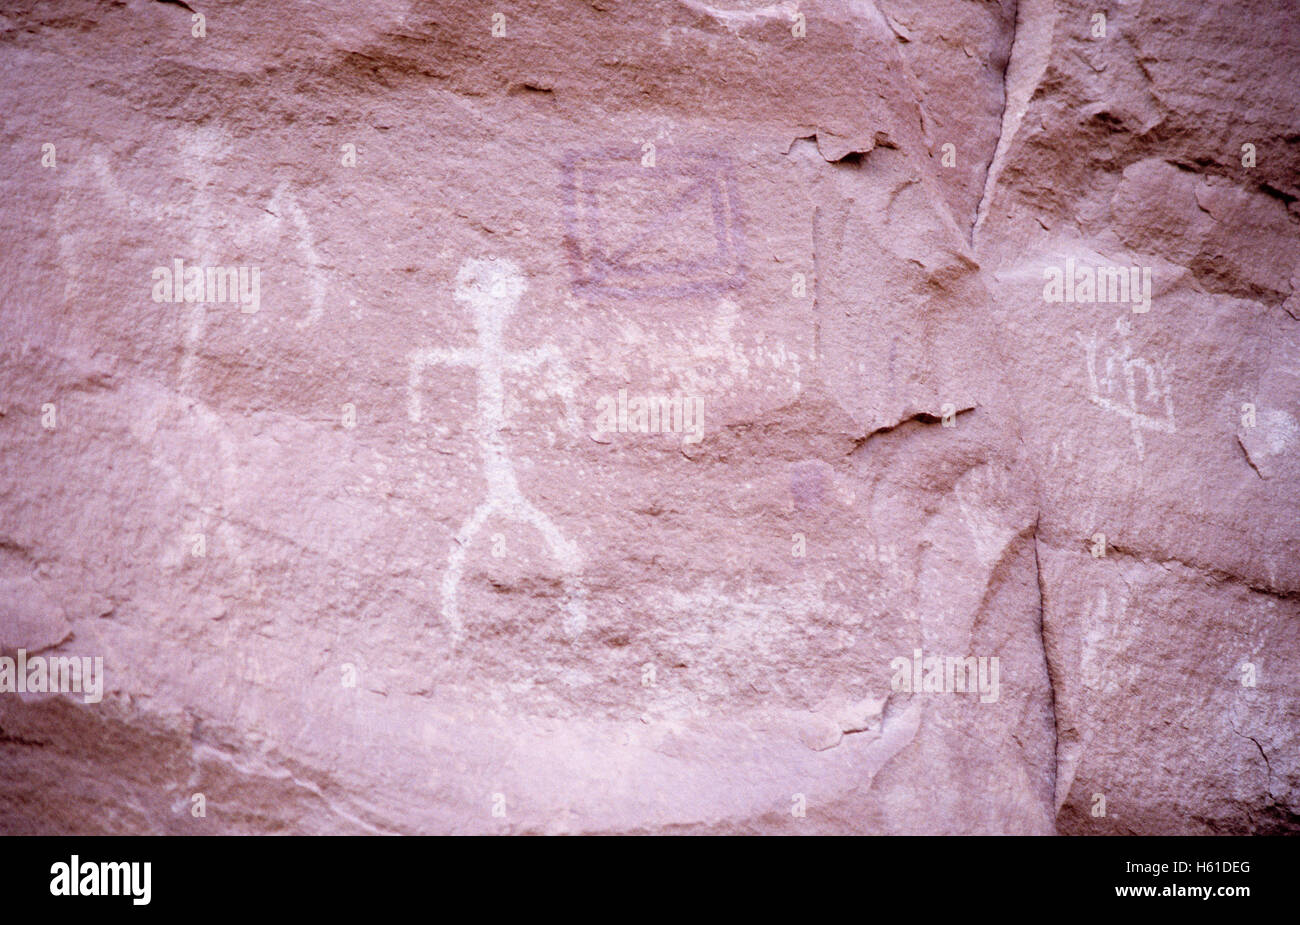 Rock art on canyon wall in Canyon de Chelly National Monument, Arizona Stock Photo